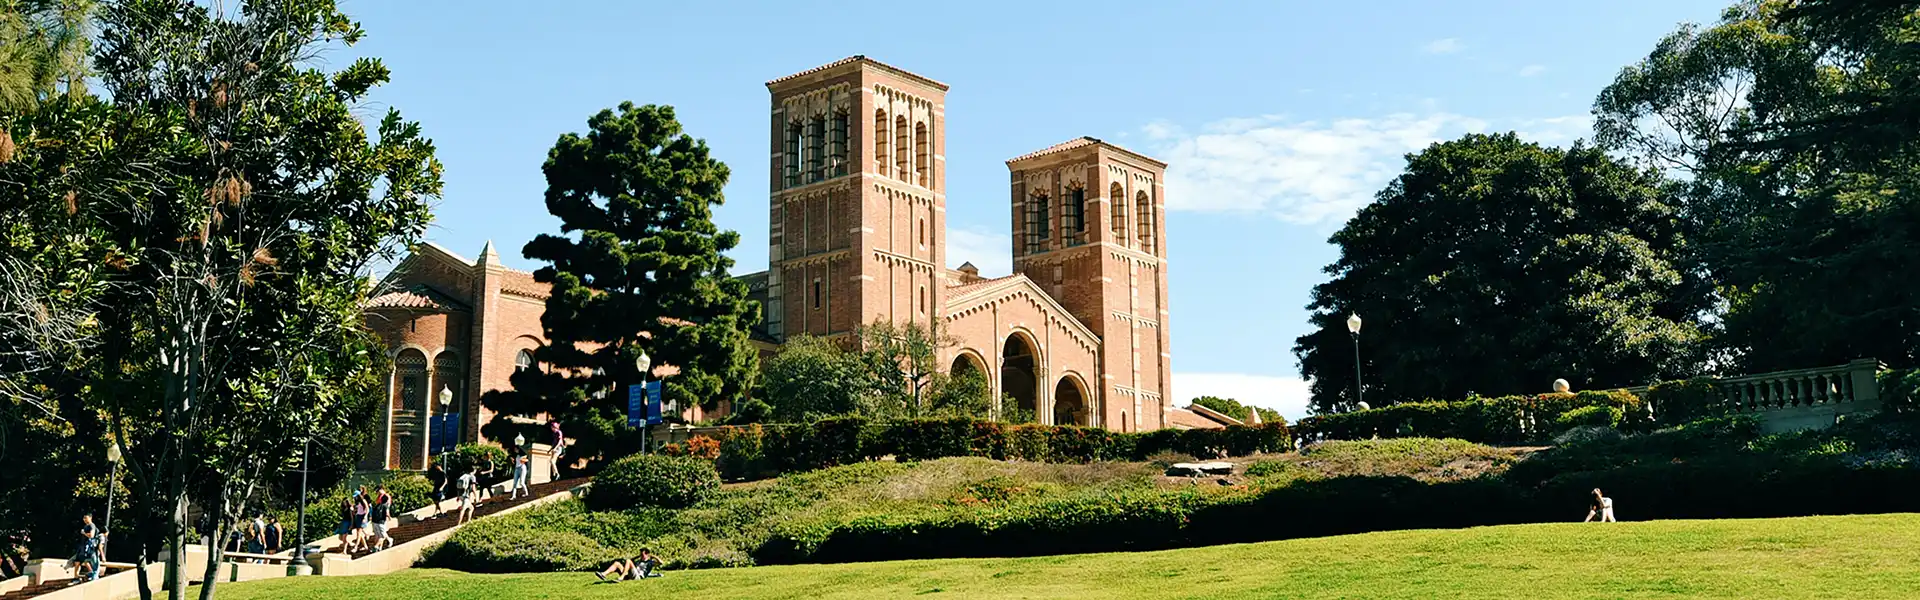 View of Royce Hall, UCLA with a grassy hill in the foreground